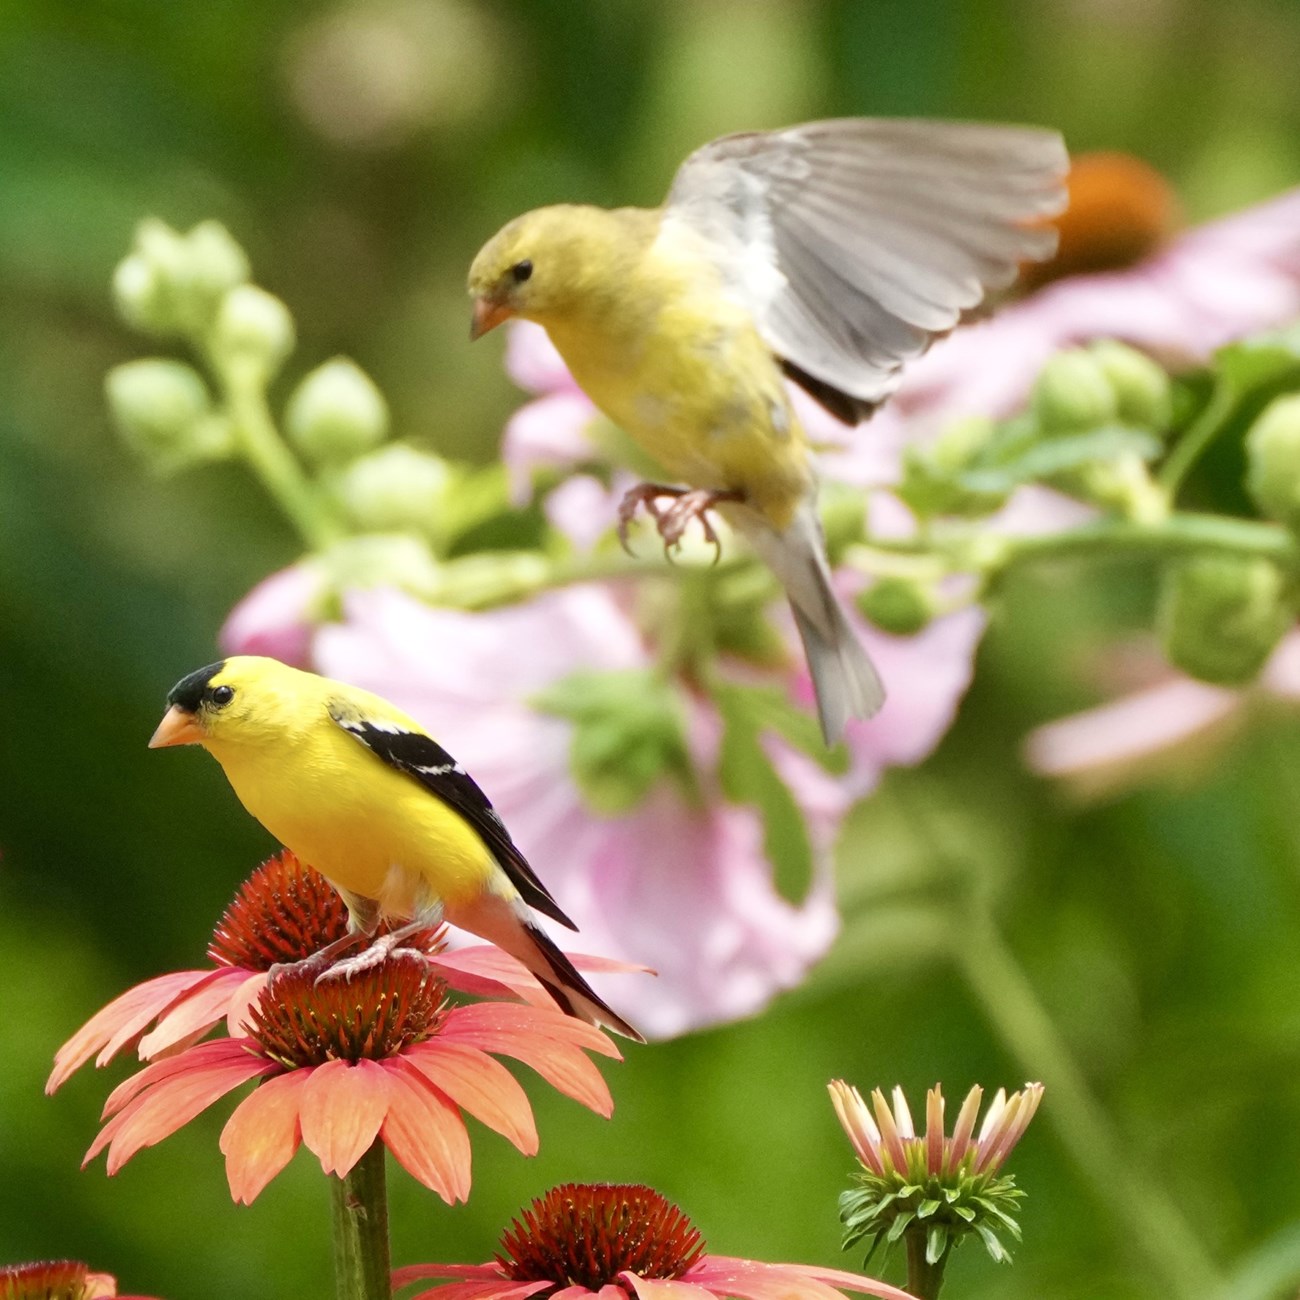 Two yellow goldfinch birds are visiting flowers.